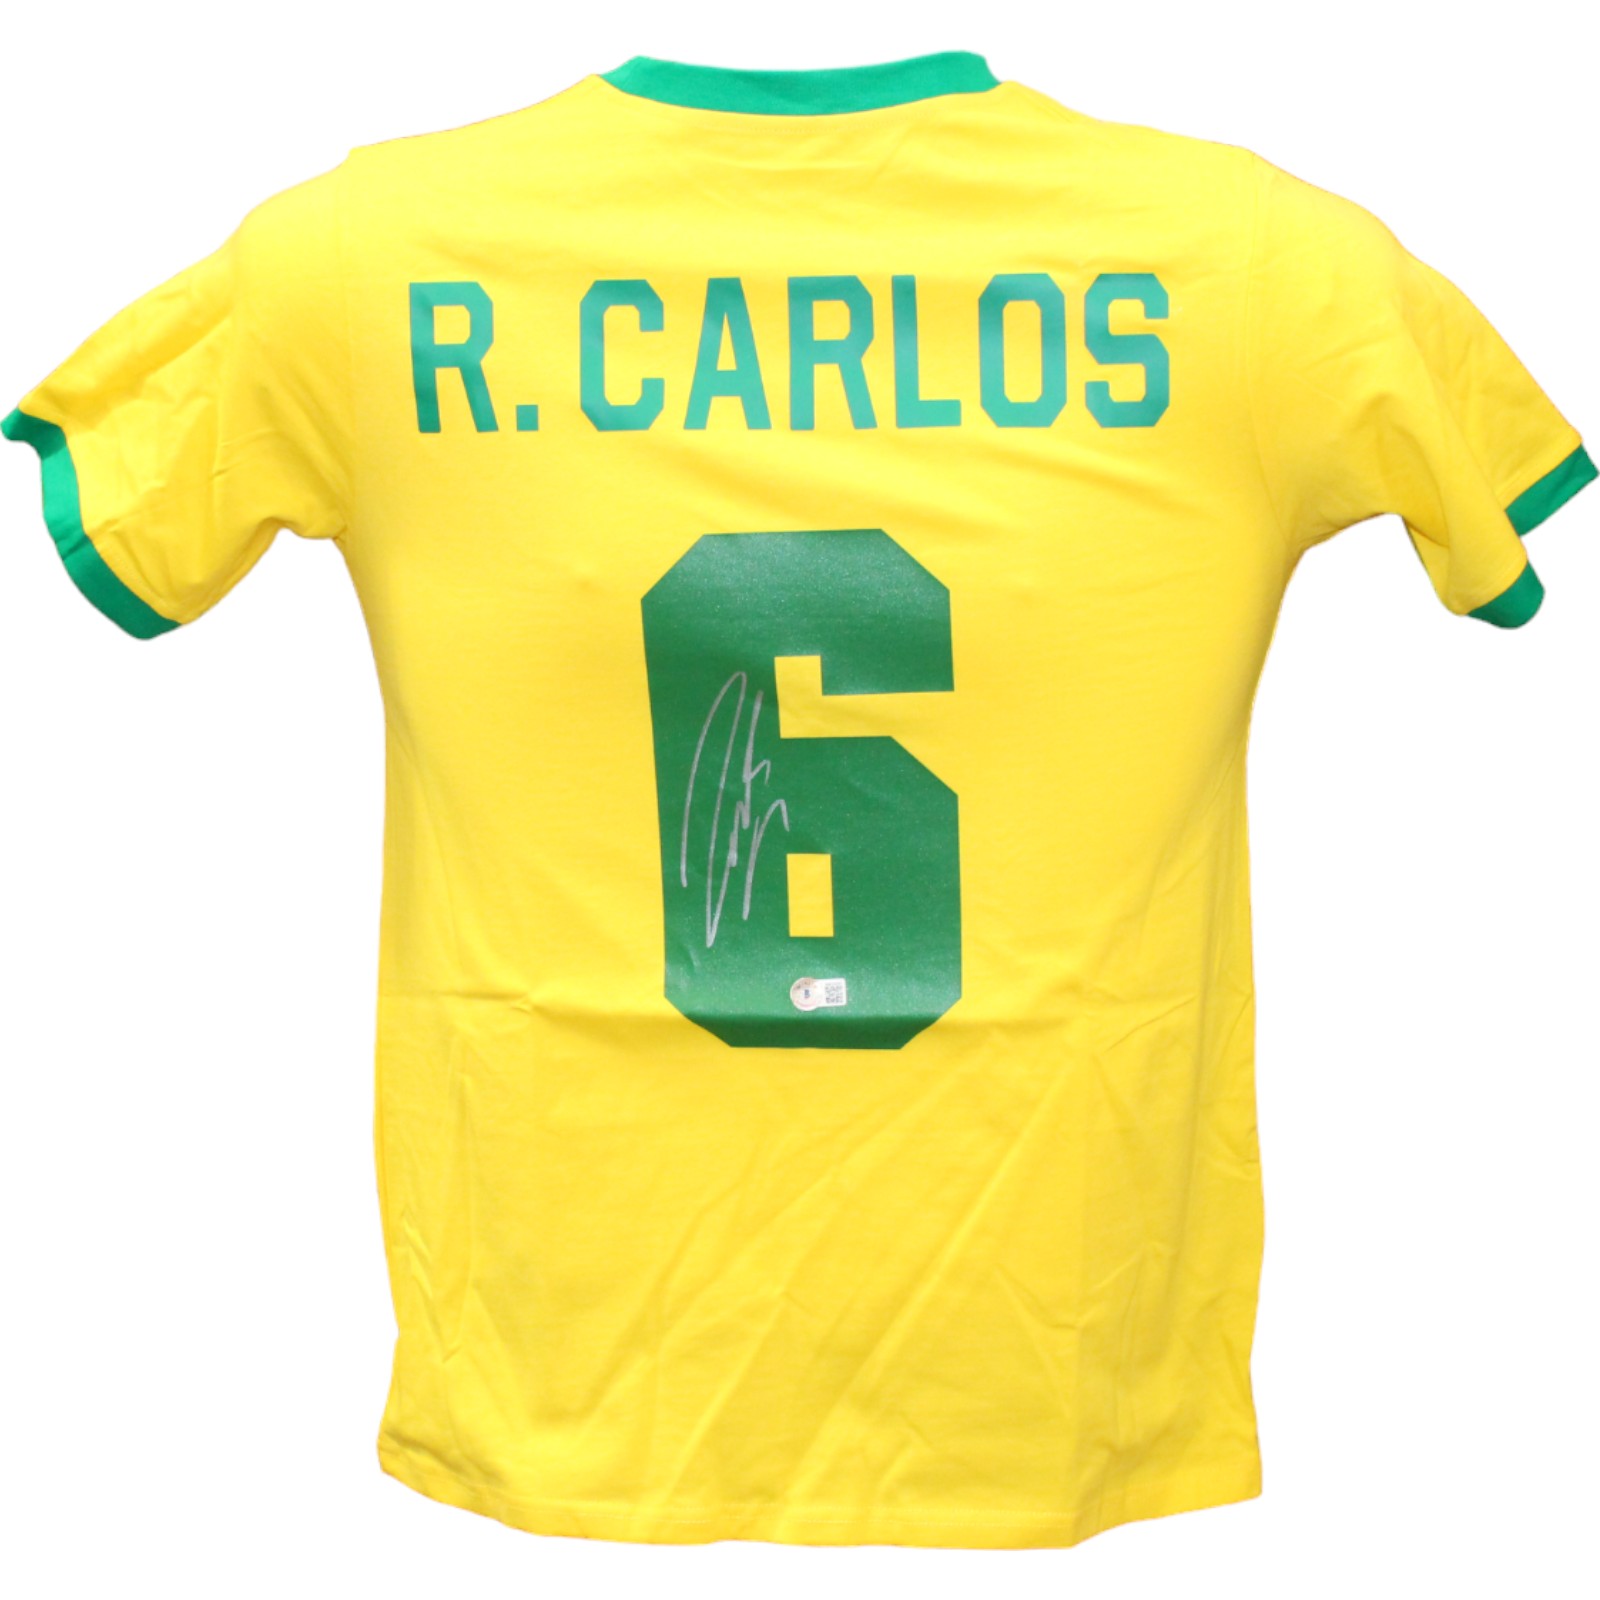 Roberto Carlos Autographed/Signed National Style Yellow Jersey Beckett